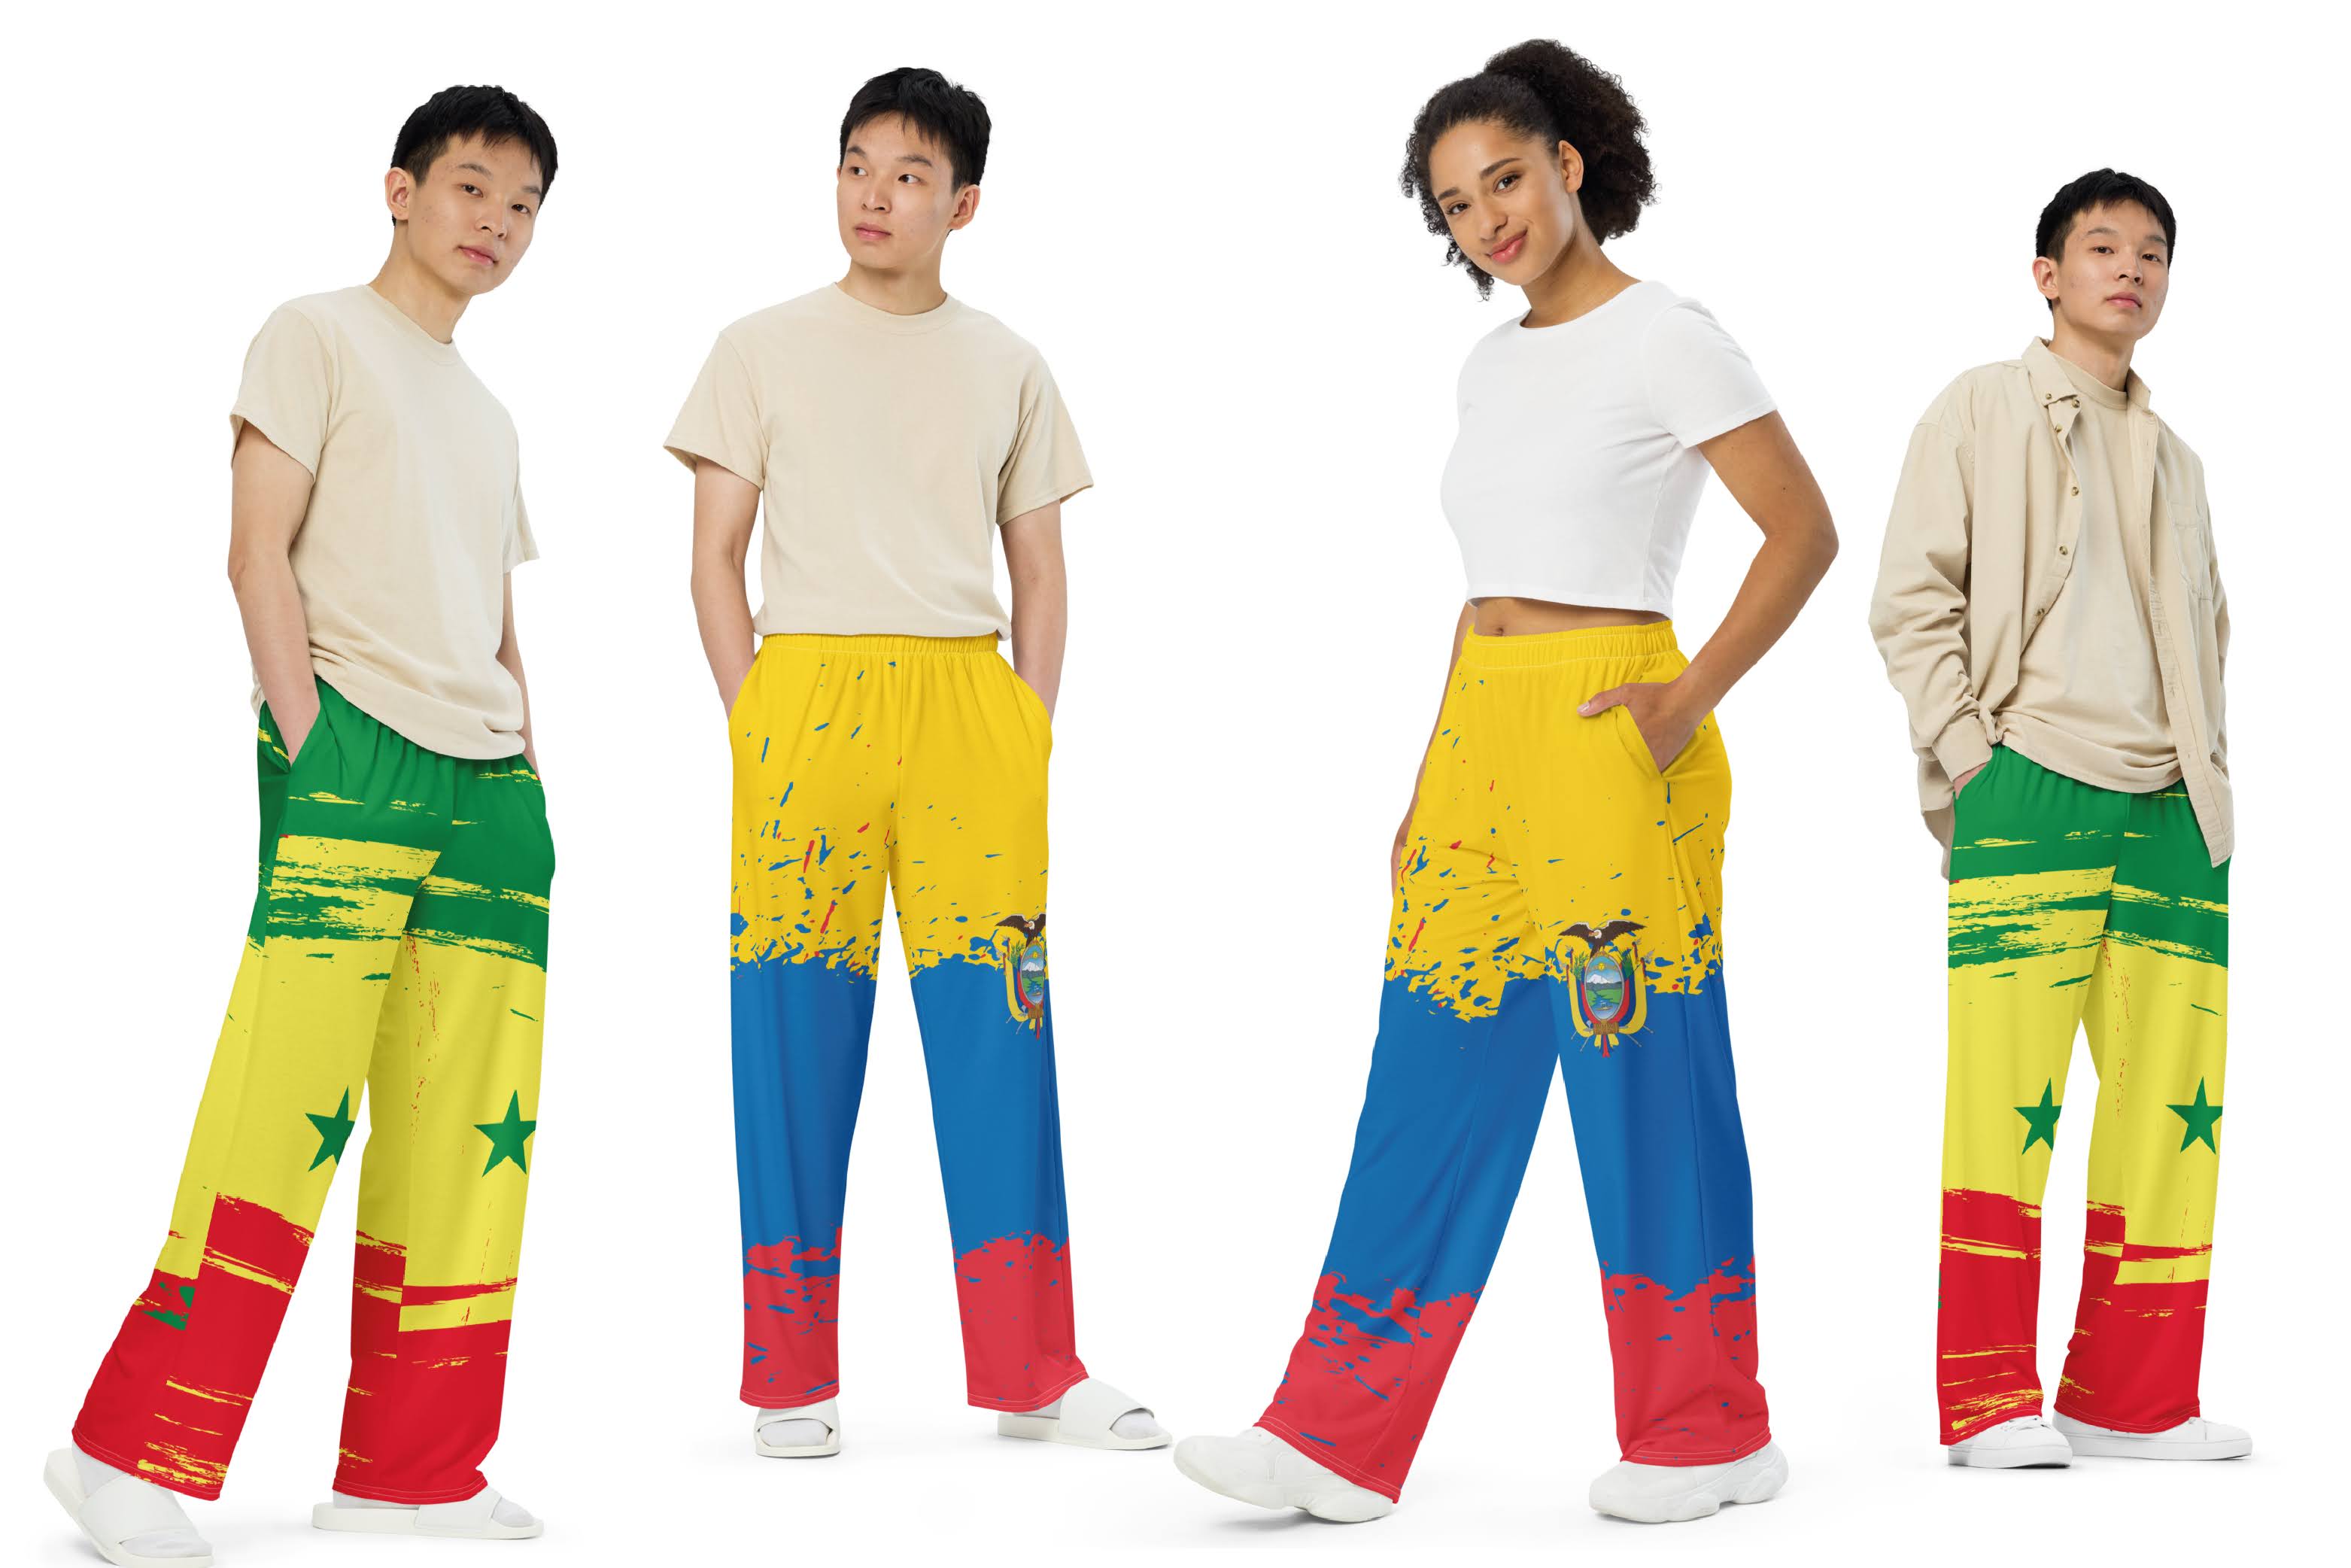 Its my mission to bring in vibrant, cool cute comfy volleyball pajama pants that show your passion for the Paris 2024 Olympics while displaying your fashion forward self.